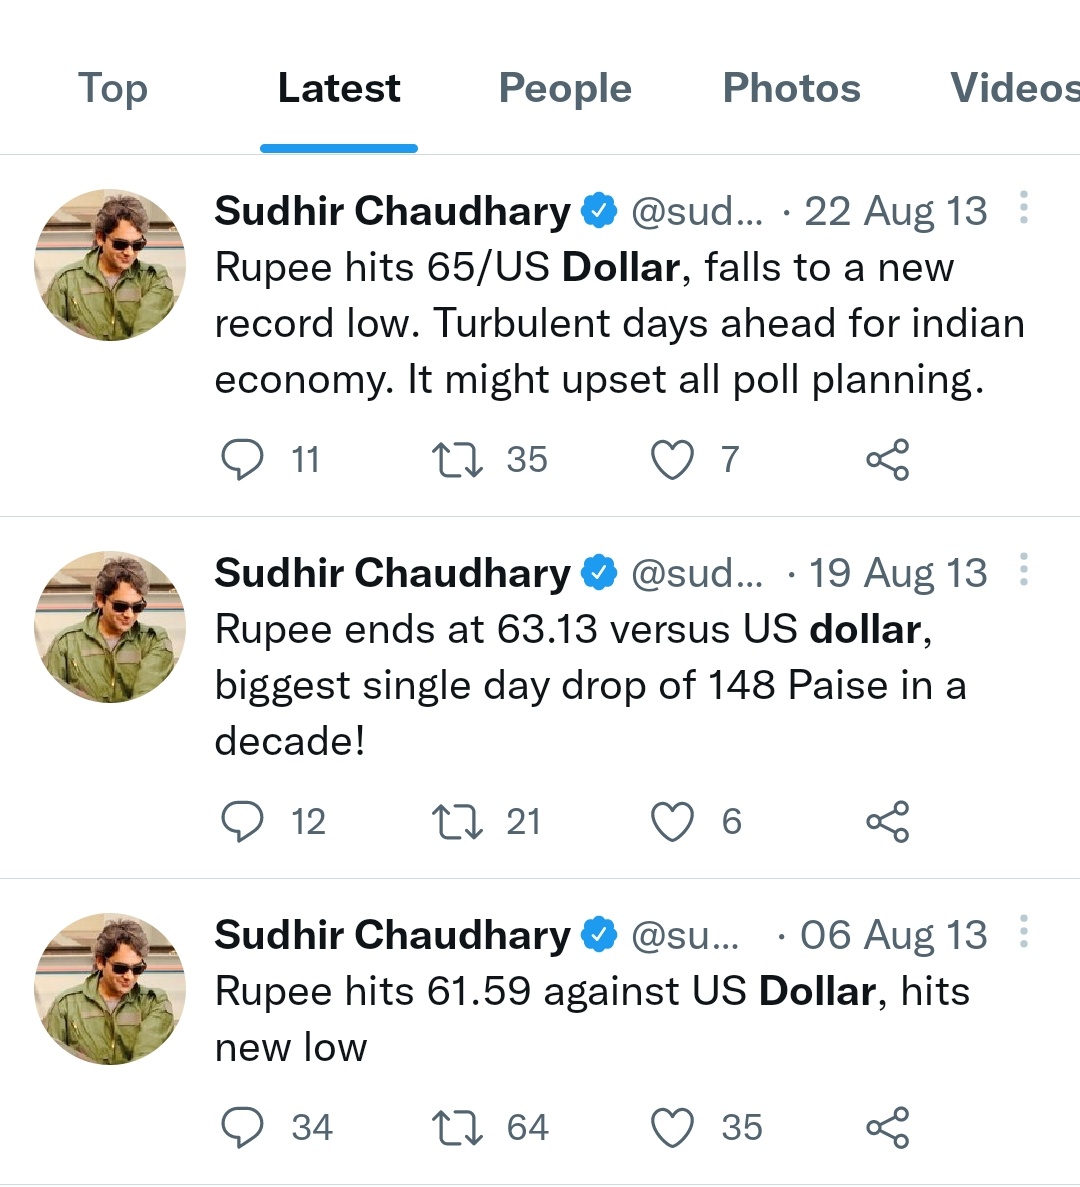 The last time a News Anchor tweeted about Rupee/Dollar exchange rate was in 2013. 
In other news, Rupee slips below 81-mark against US dollar for first time ever.